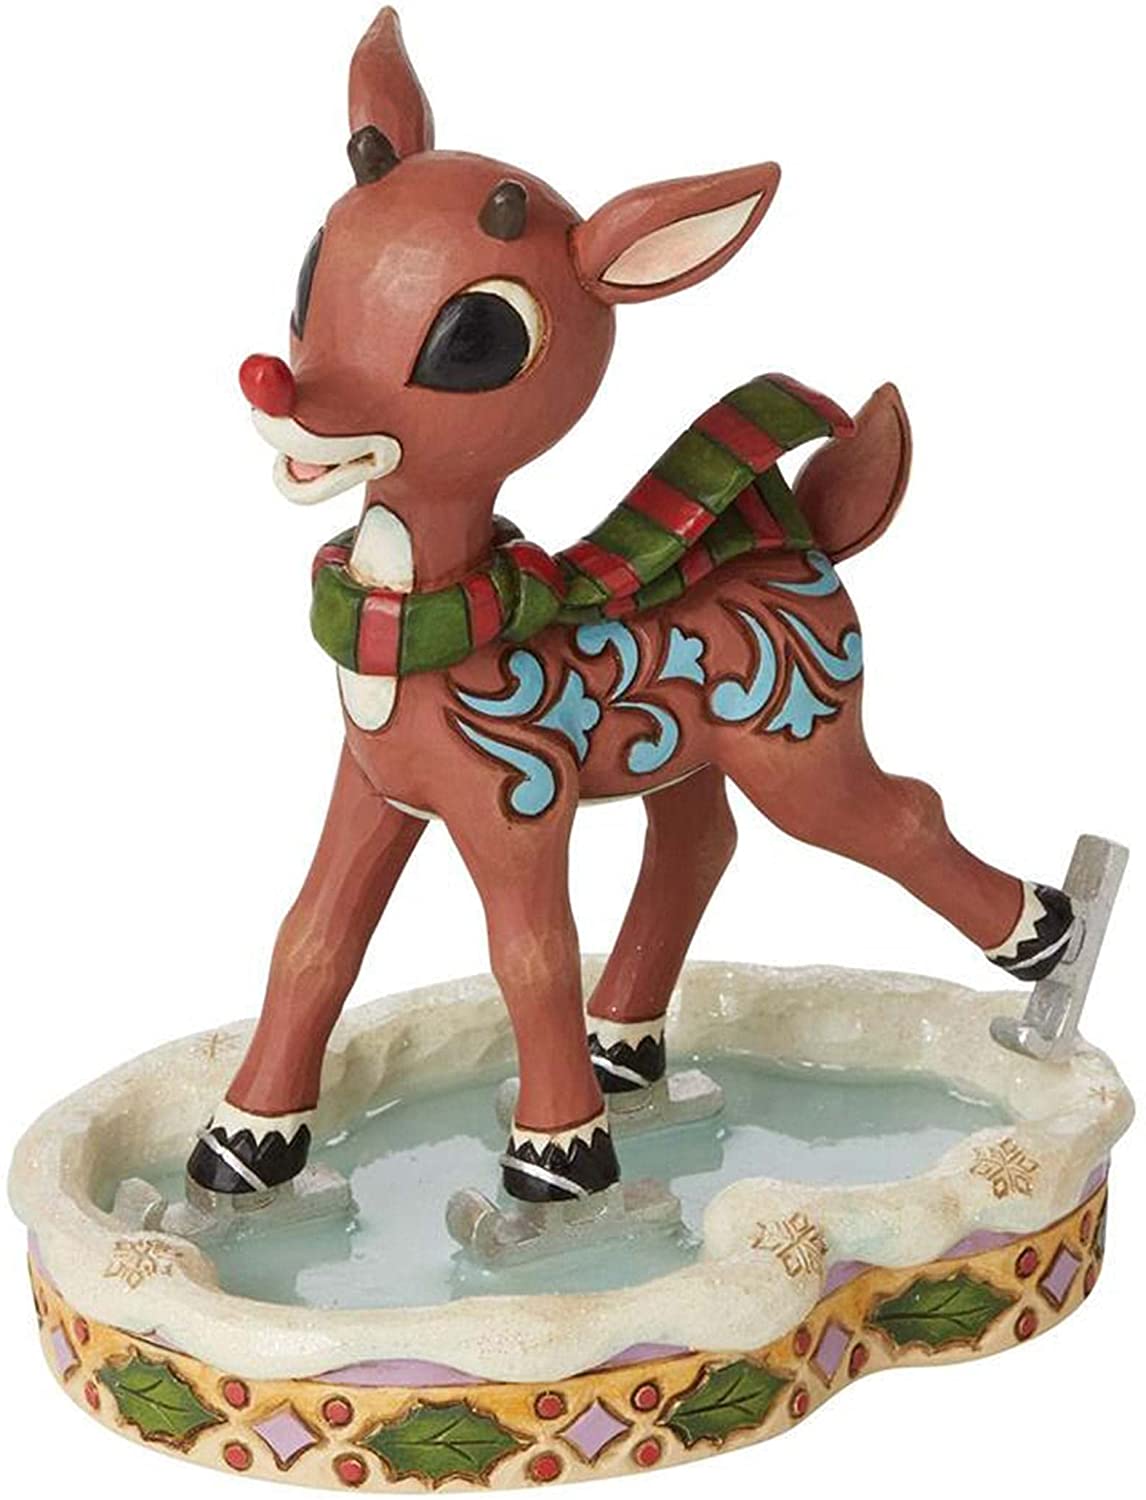 Rudolph skating on ice stone resin figurine by Jim Shore for Enesco 